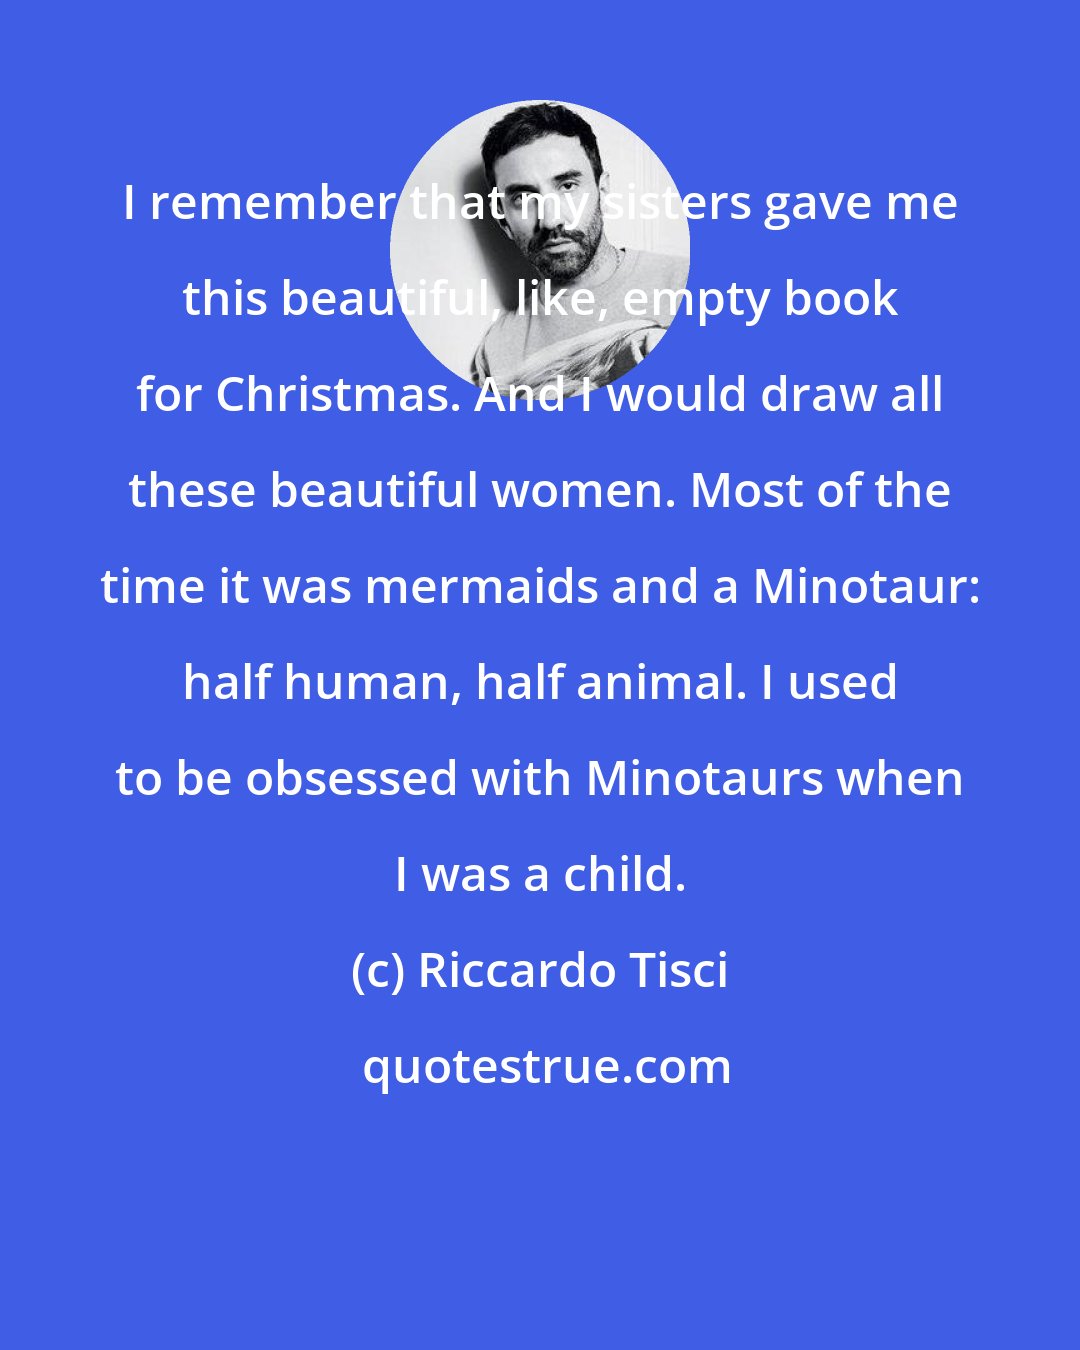 Riccardo Tisci: I remember that my sisters gave me this beautiful, like, empty book for Christmas. And I would draw all these beautiful women. Most of the time it was mermaids and a Minotaur: half human, half animal. I used to be obsessed with Minotaurs when I was a child.